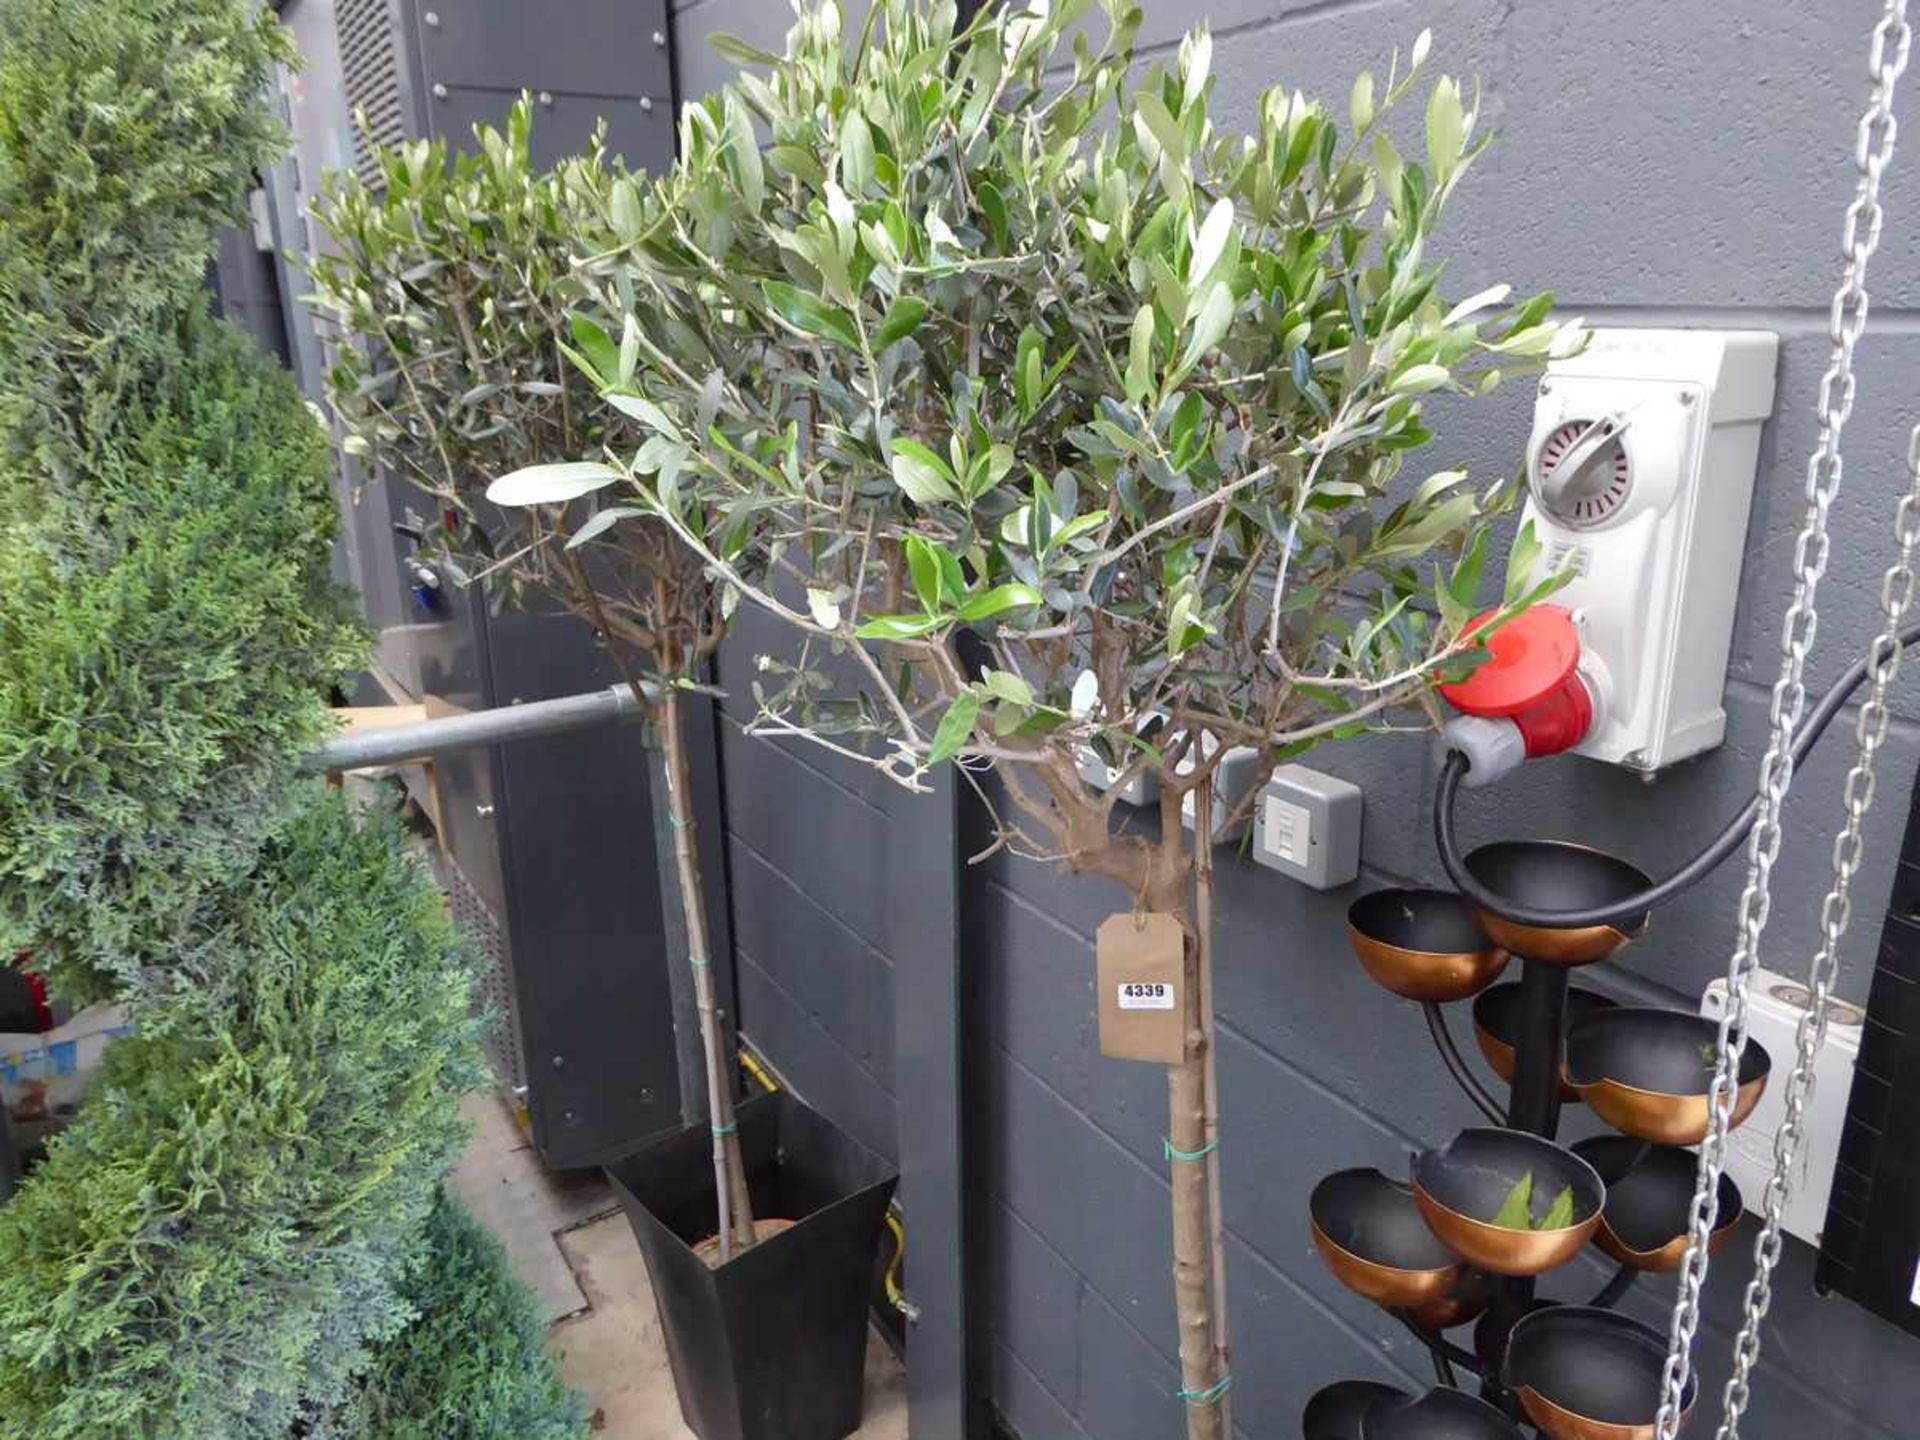 2 potted olive trees